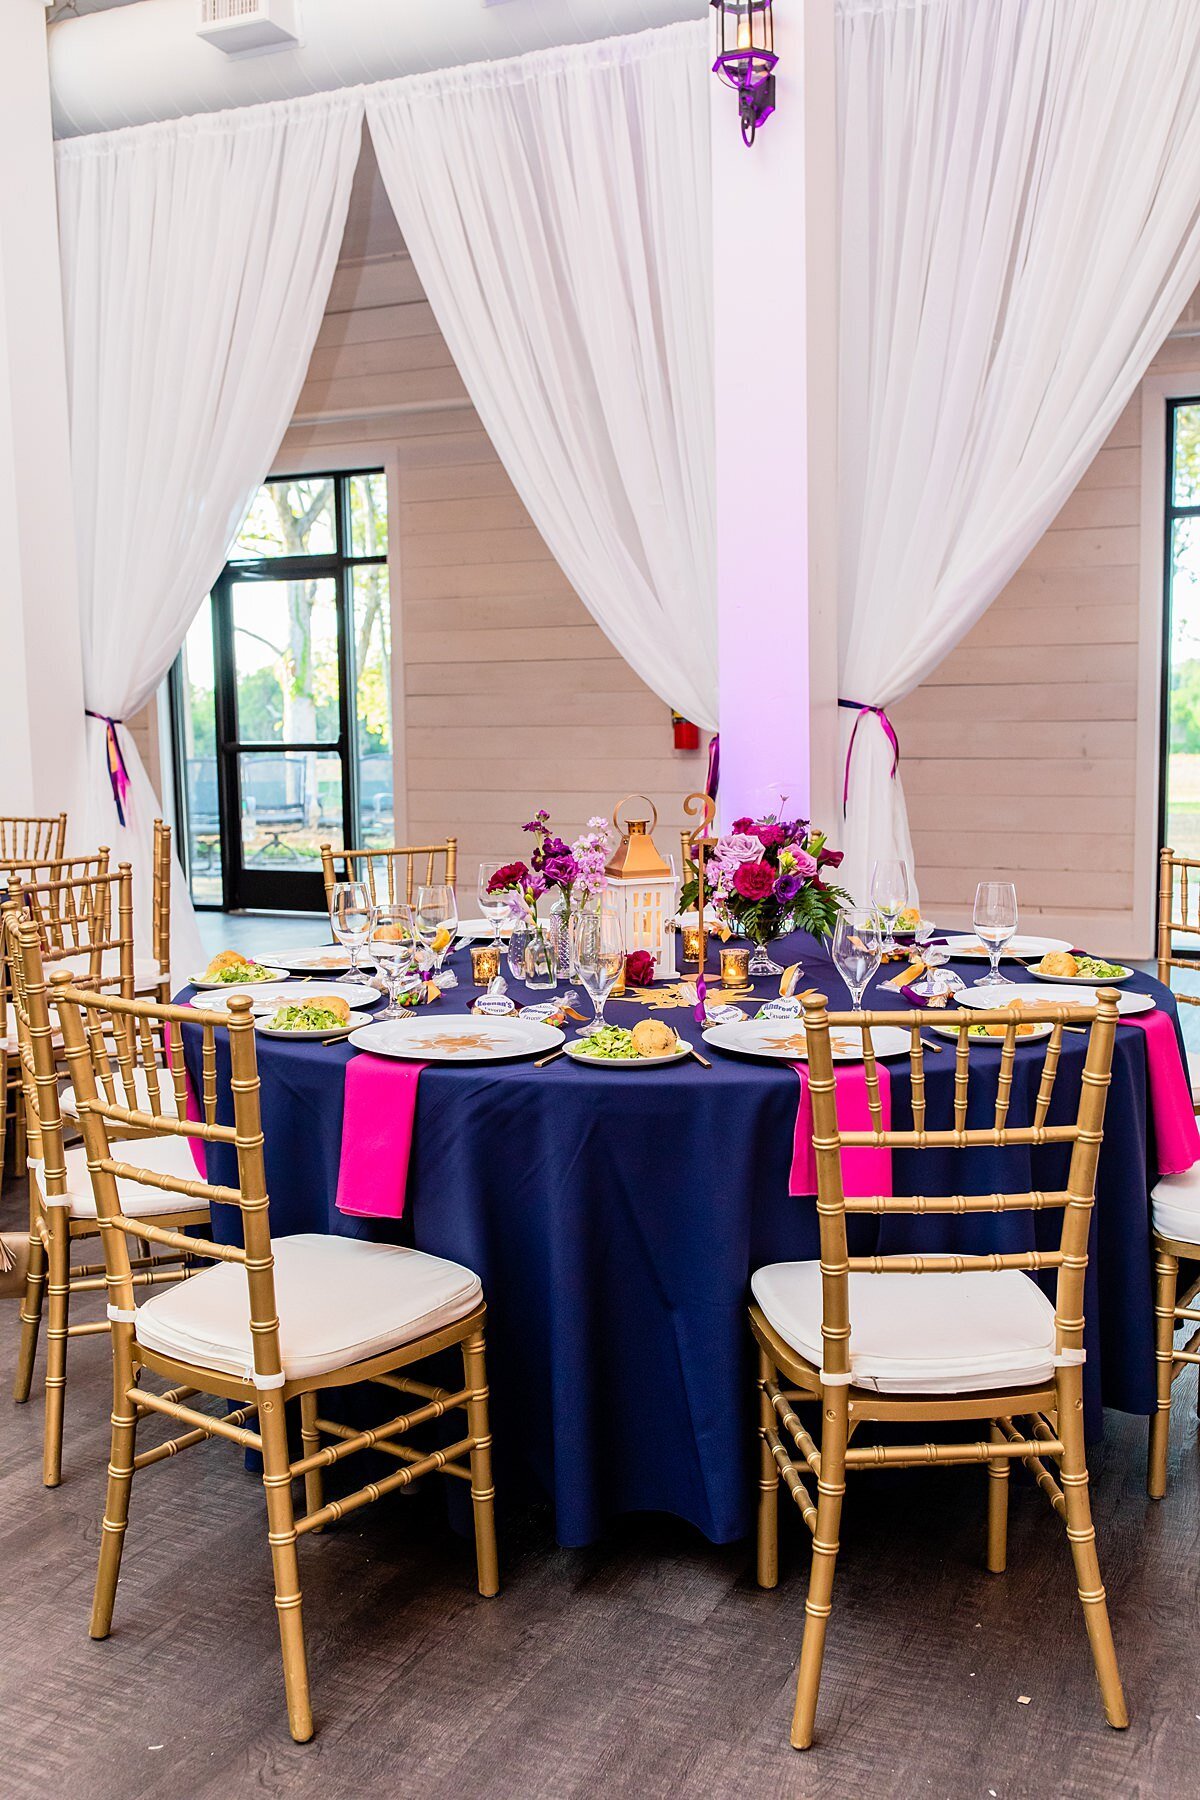 Disney's Tangled wedding table set with a navy linen, hot pink napkins, chargers with gold suns and gold lanterns with pink, purple, magenta flowers and ivory drapery in the background. The table is set with gold chivari chairs with white cushions.